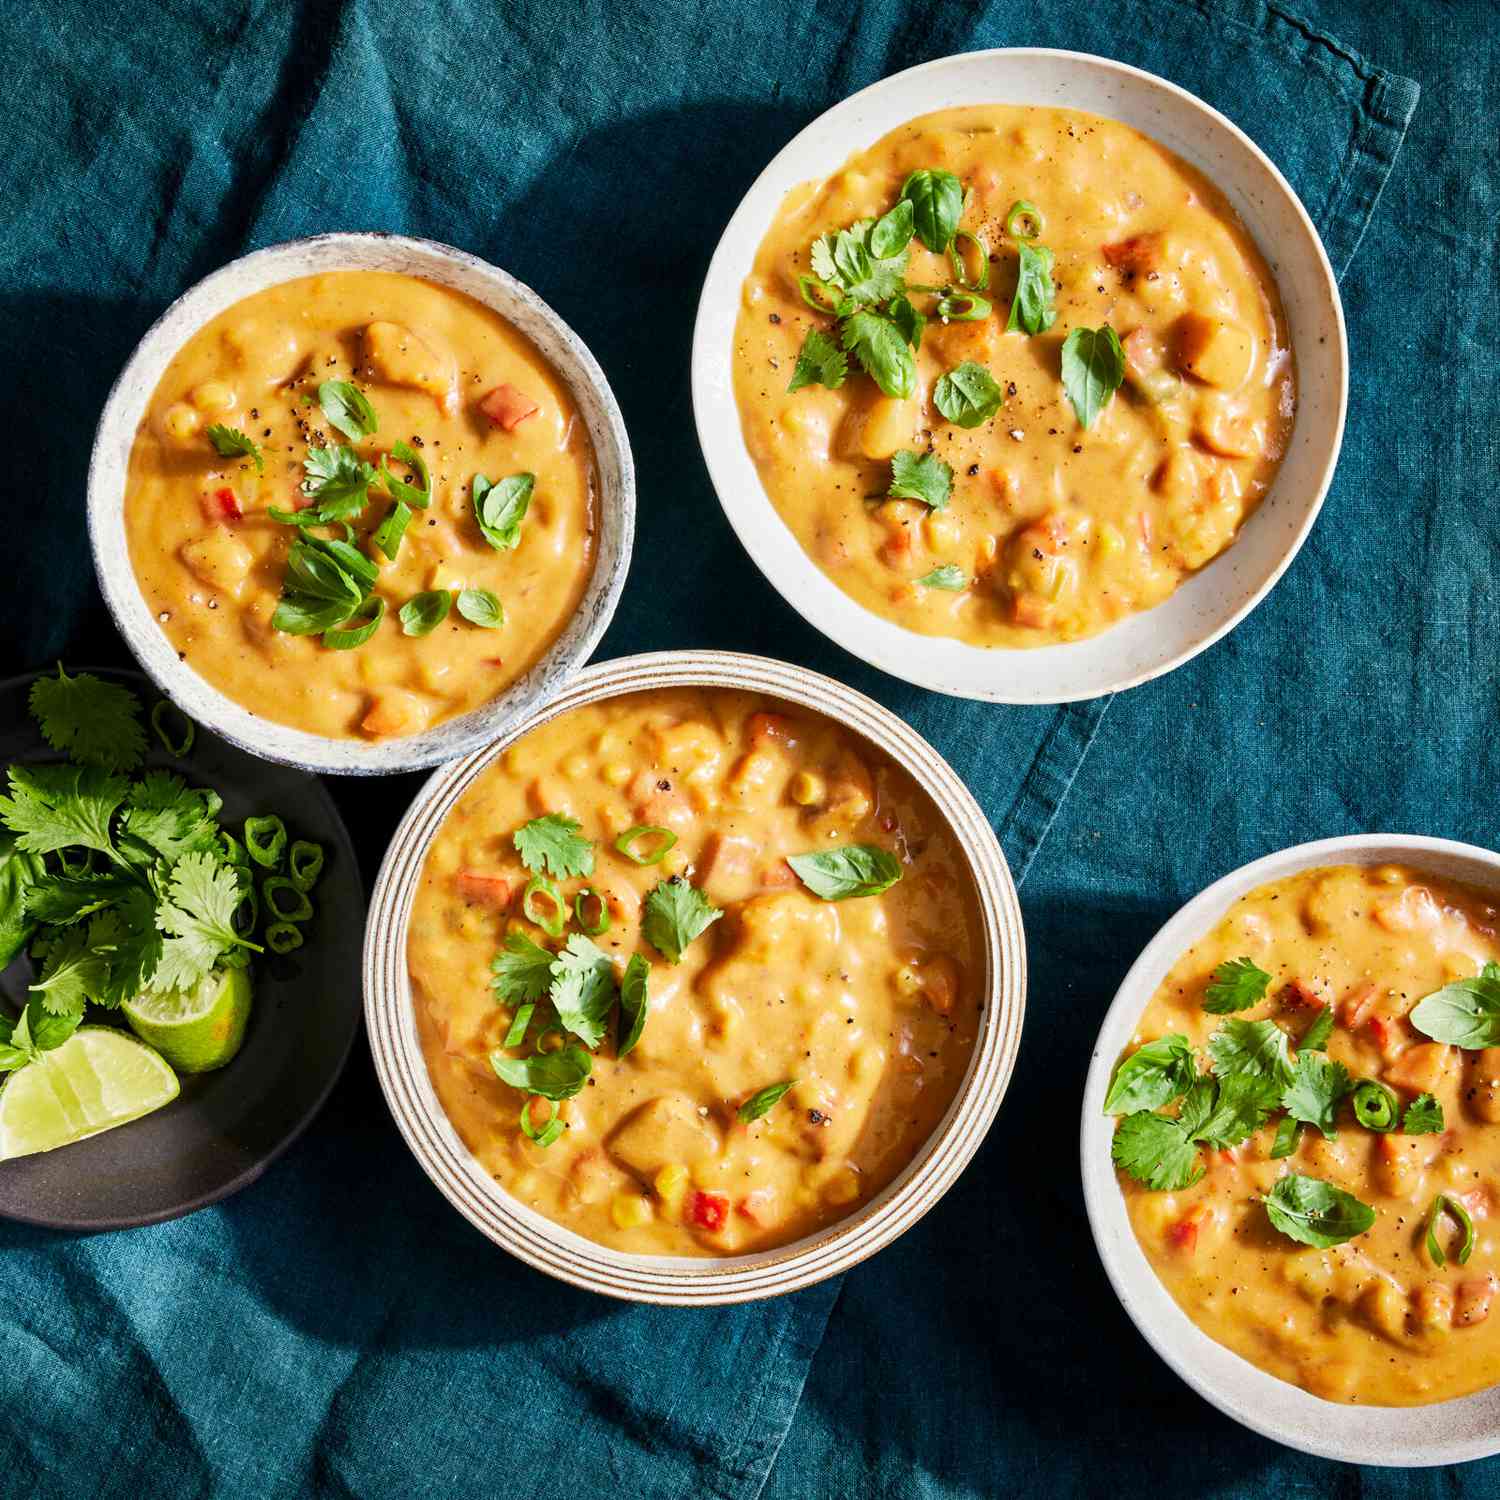 Bowls of Slow-Cooker Thai Chile & Corn Chowder